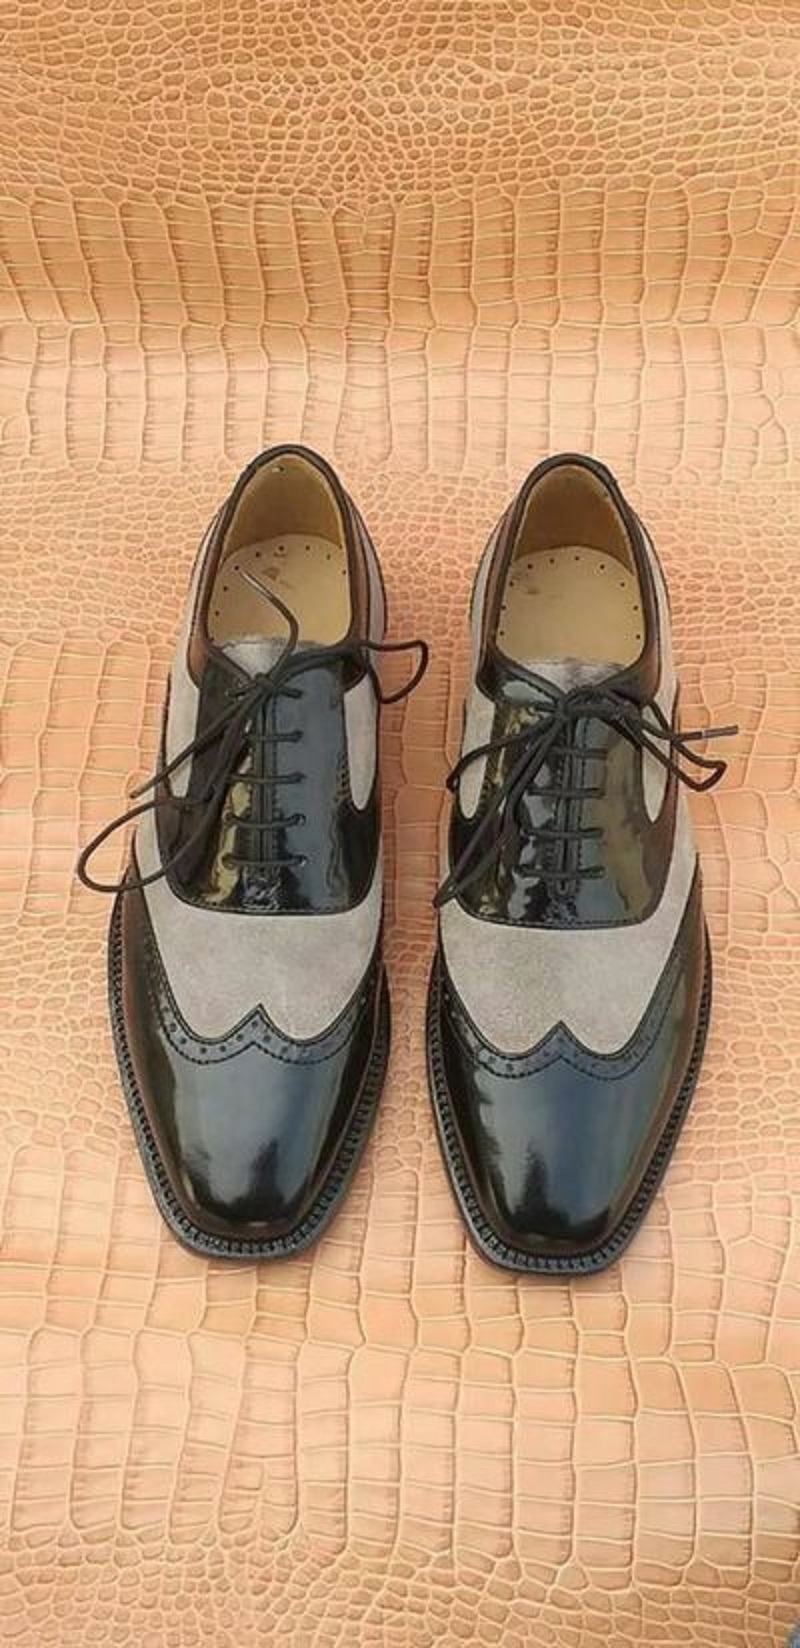 Balmoral's In Two Tone Handmade 100% Suede Leather Wingtip Lace Up Men's Shoe